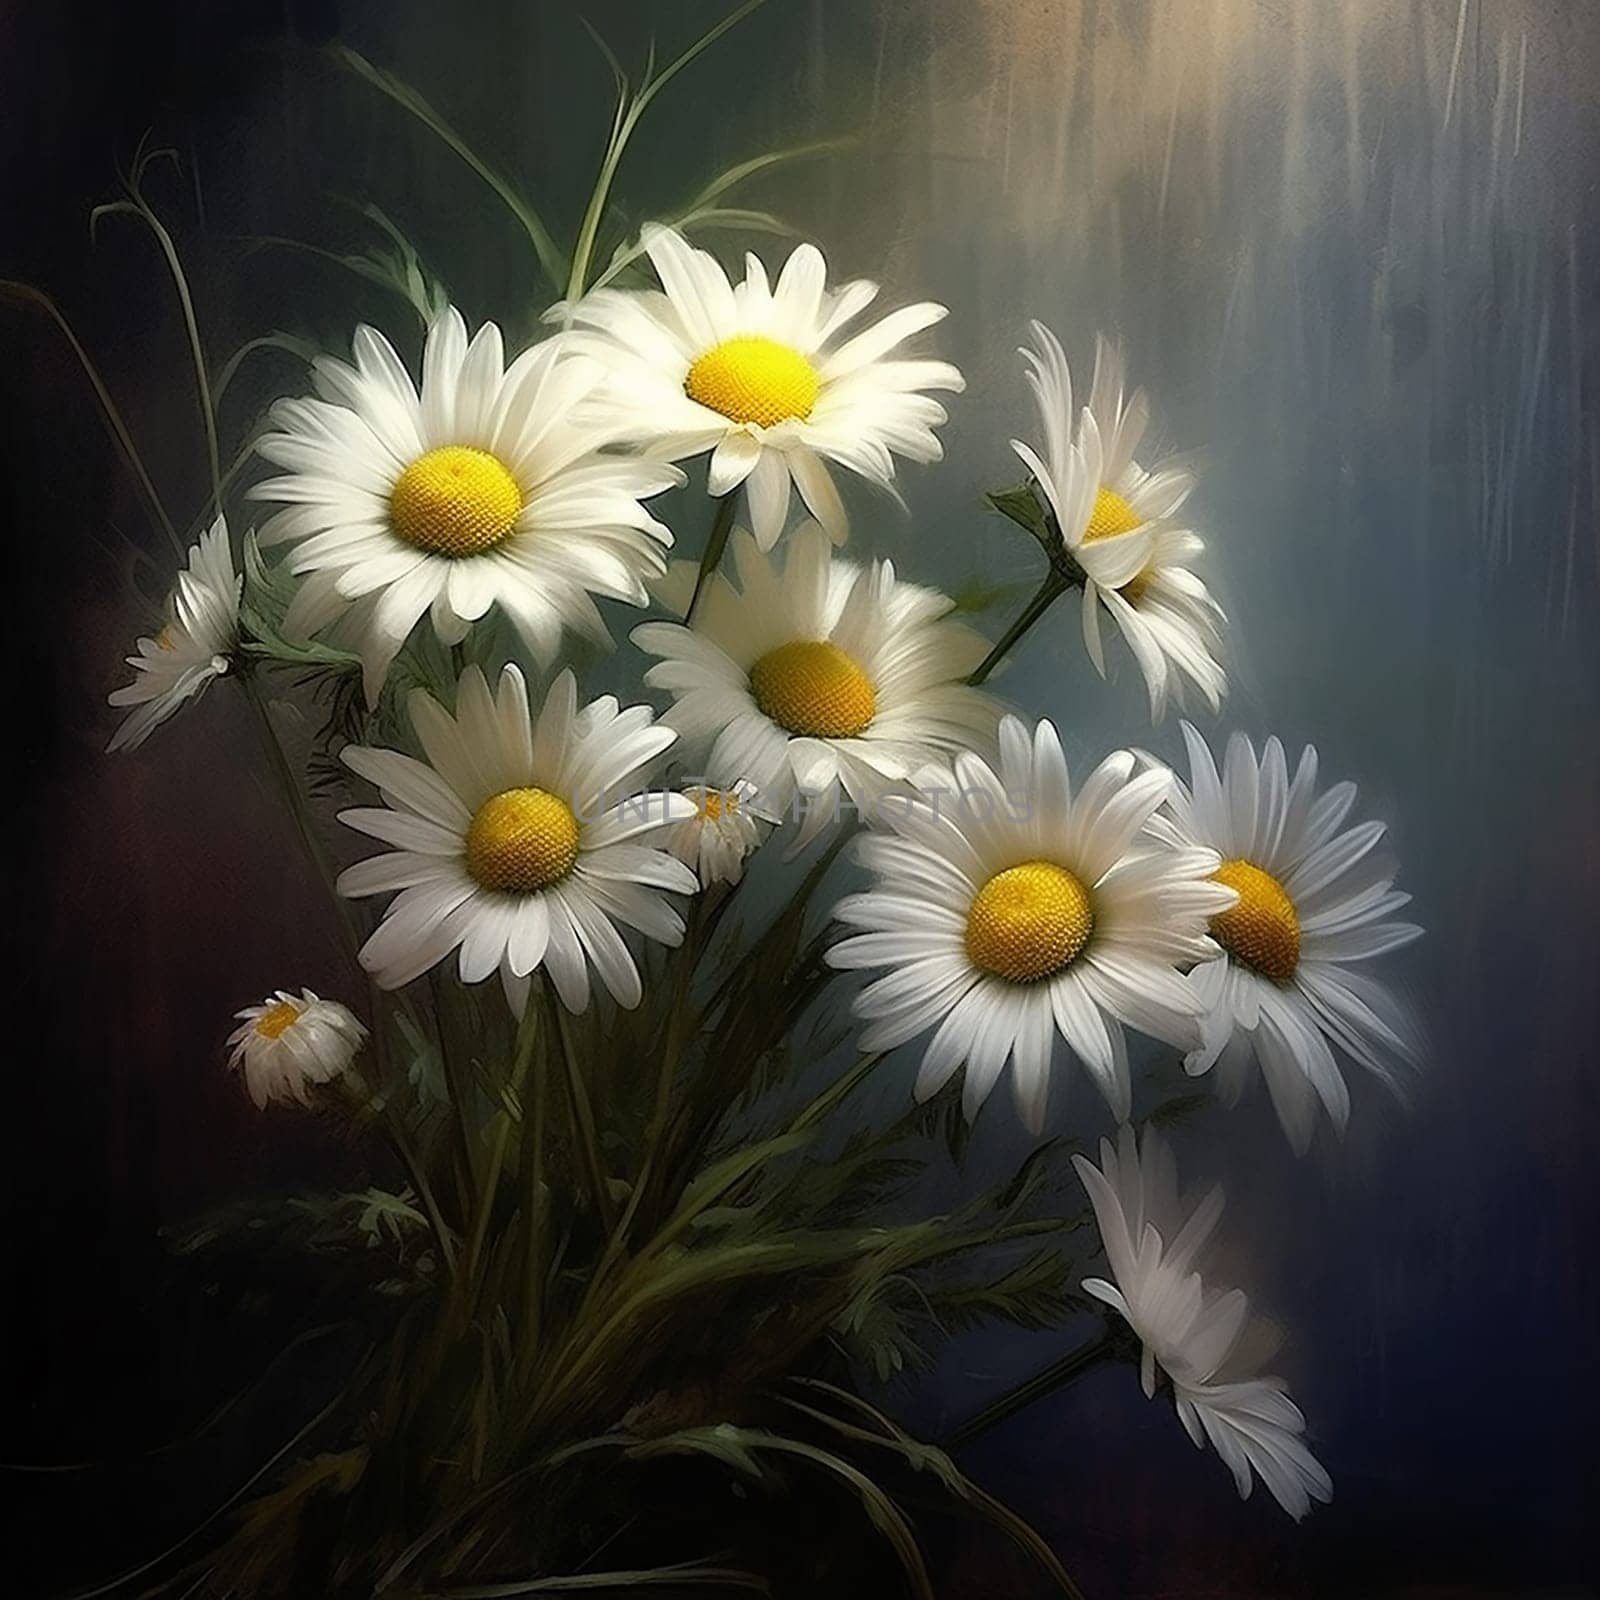 A bouquet of white daisies against a moody, dark backdrop, highlighting their pristine beauty. by Hype2art